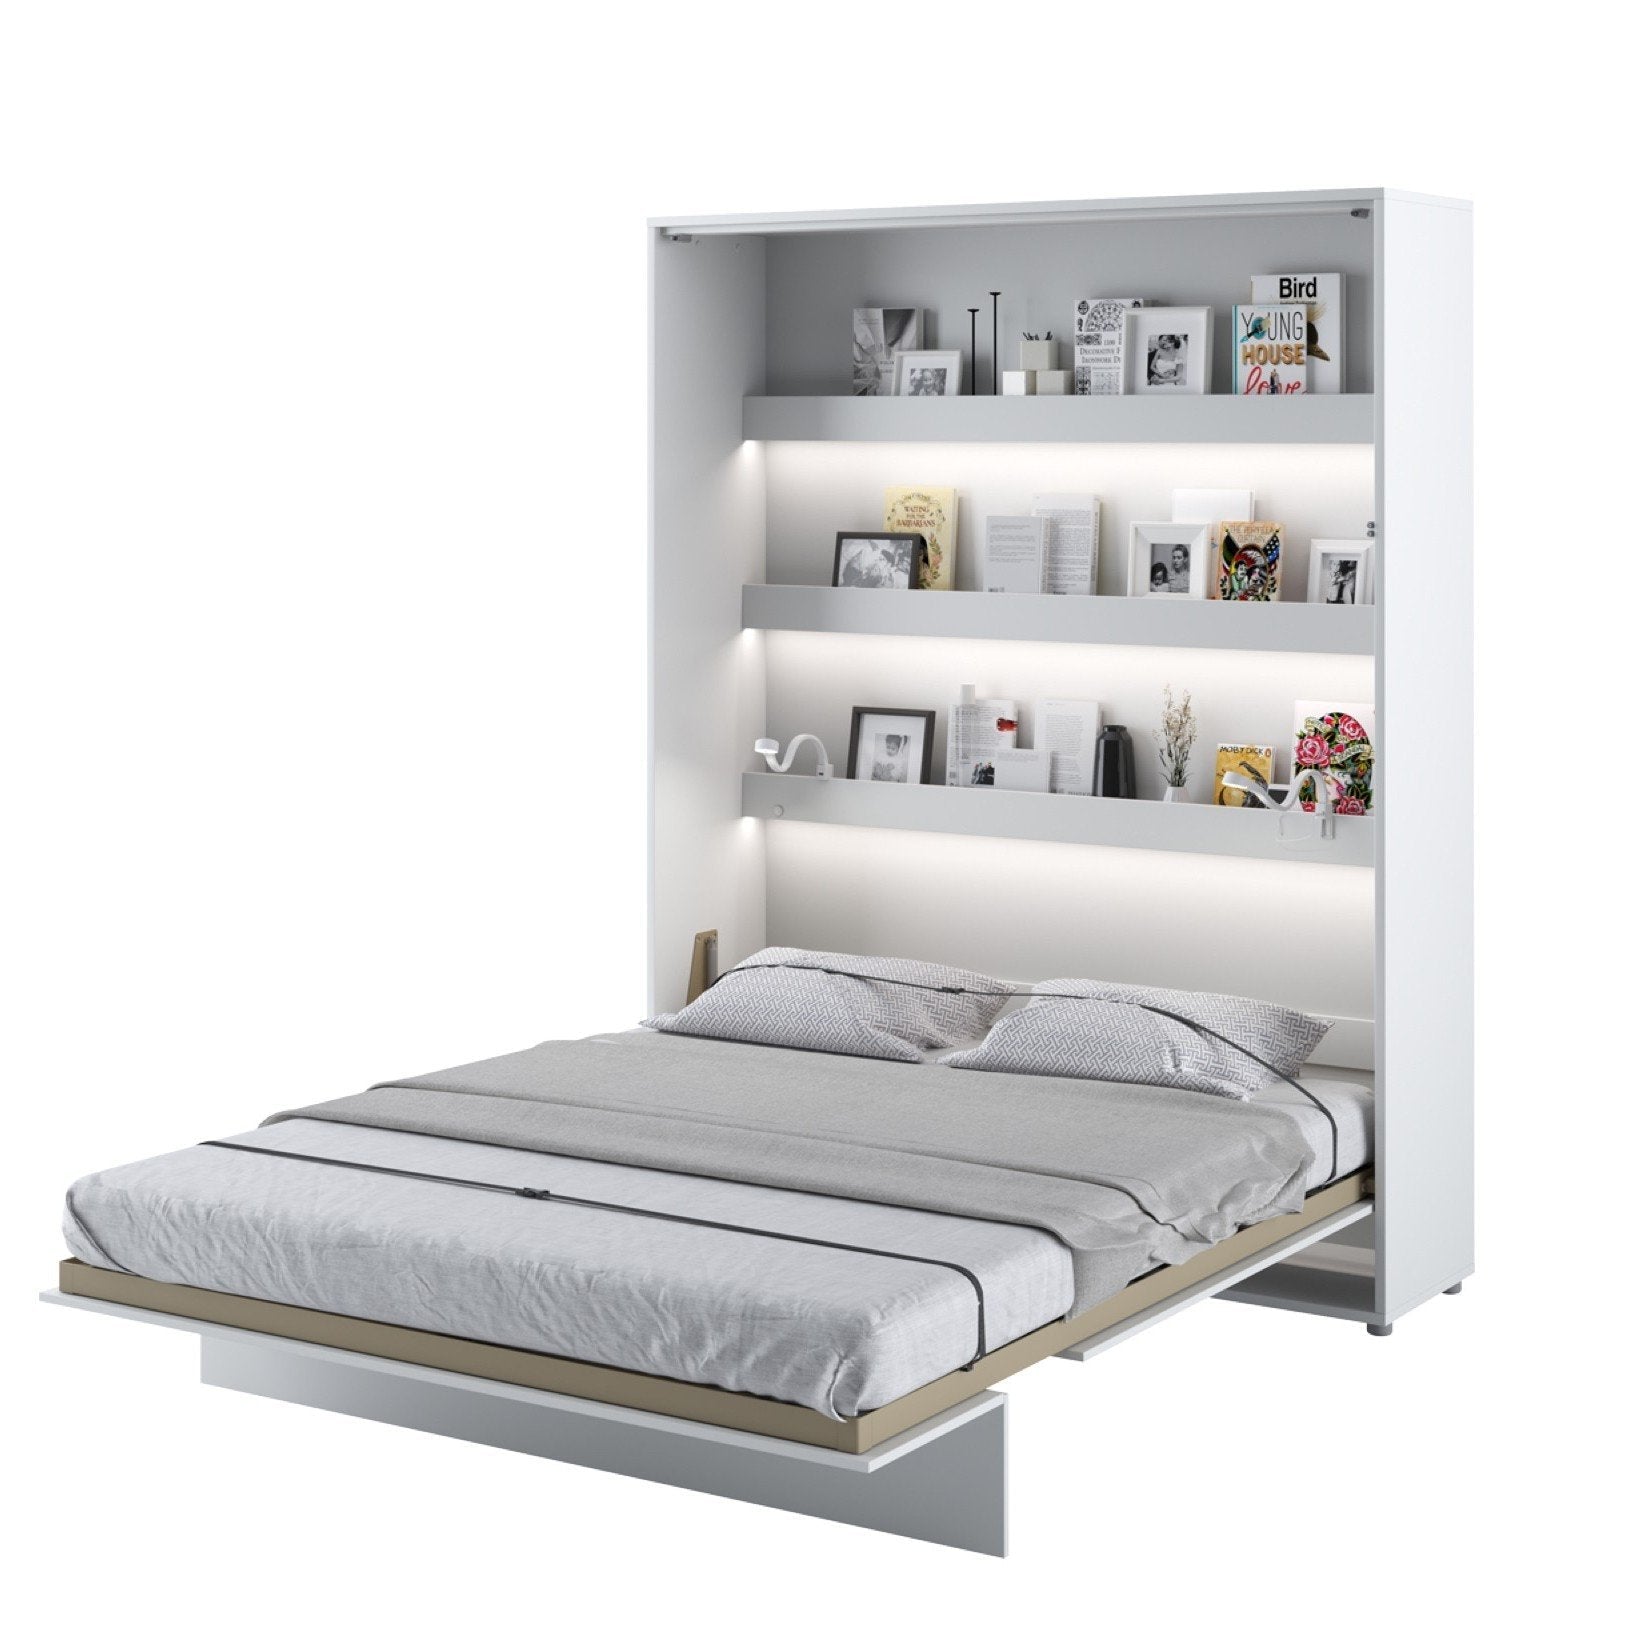 View BC12 Vertical Wall Bed Concept 160cm Murphy Bed White Gloss 160 x 200cm information